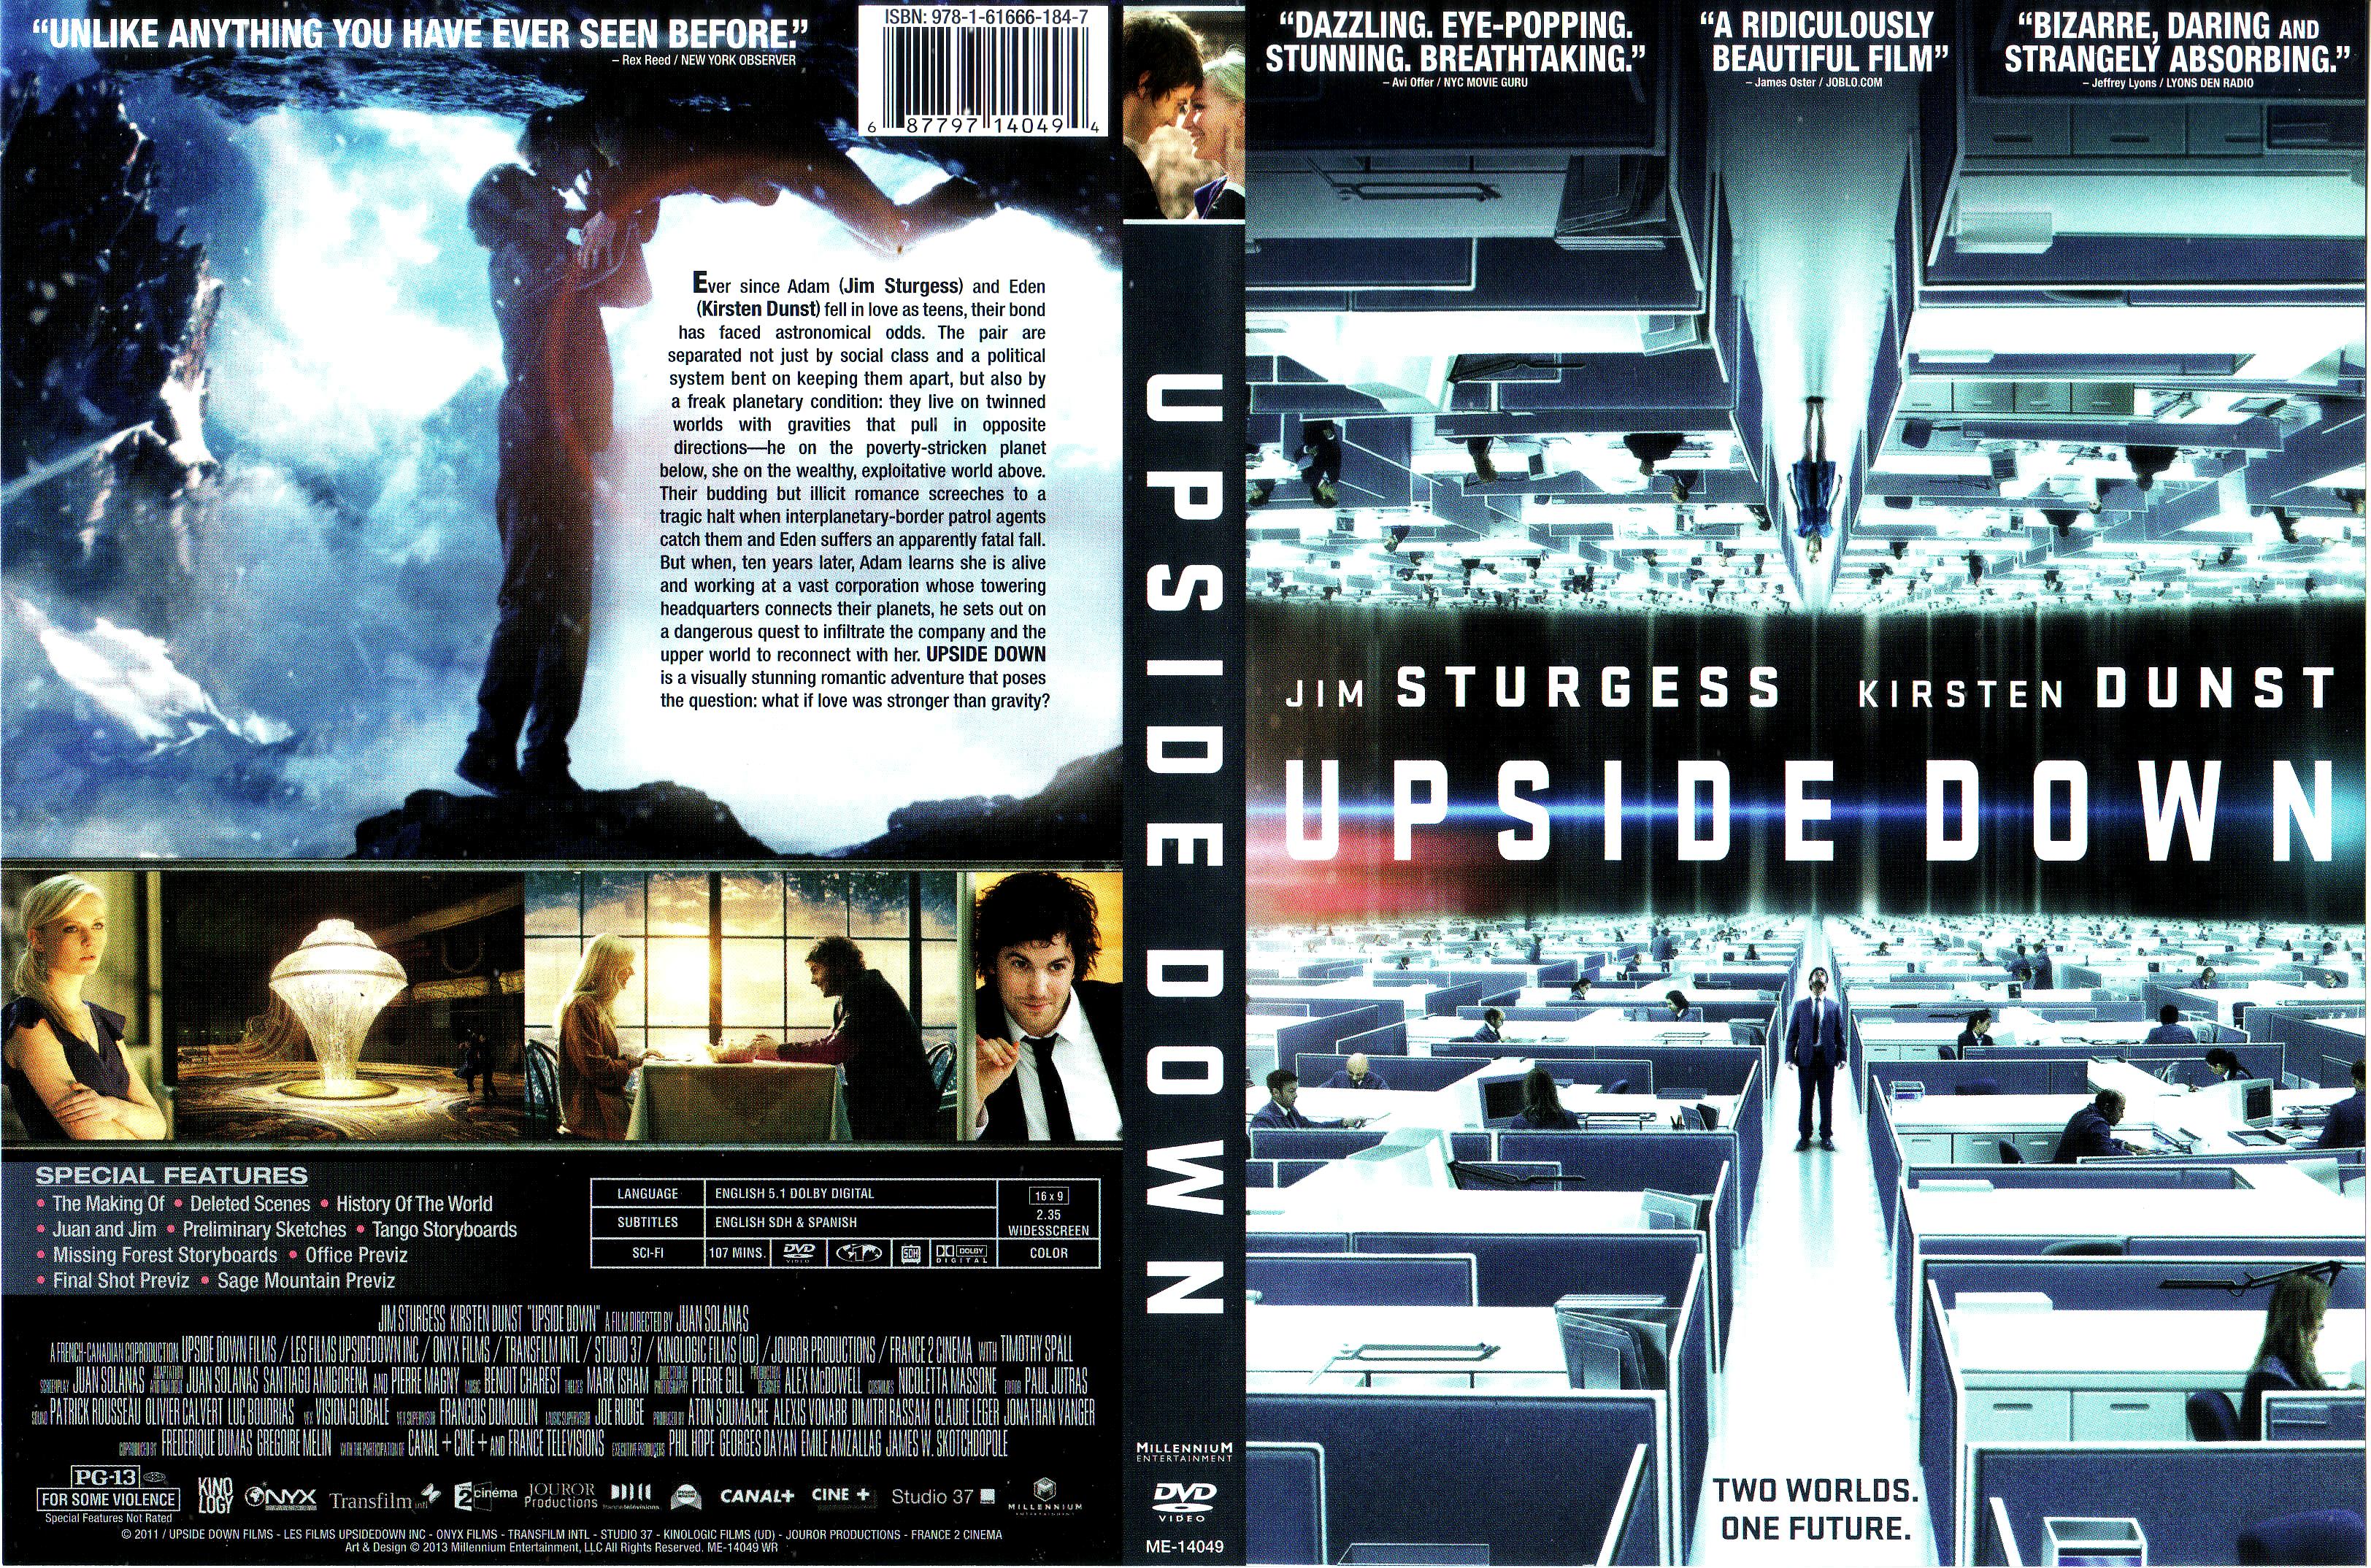 Jaquette DVD Upside Down Zone 1